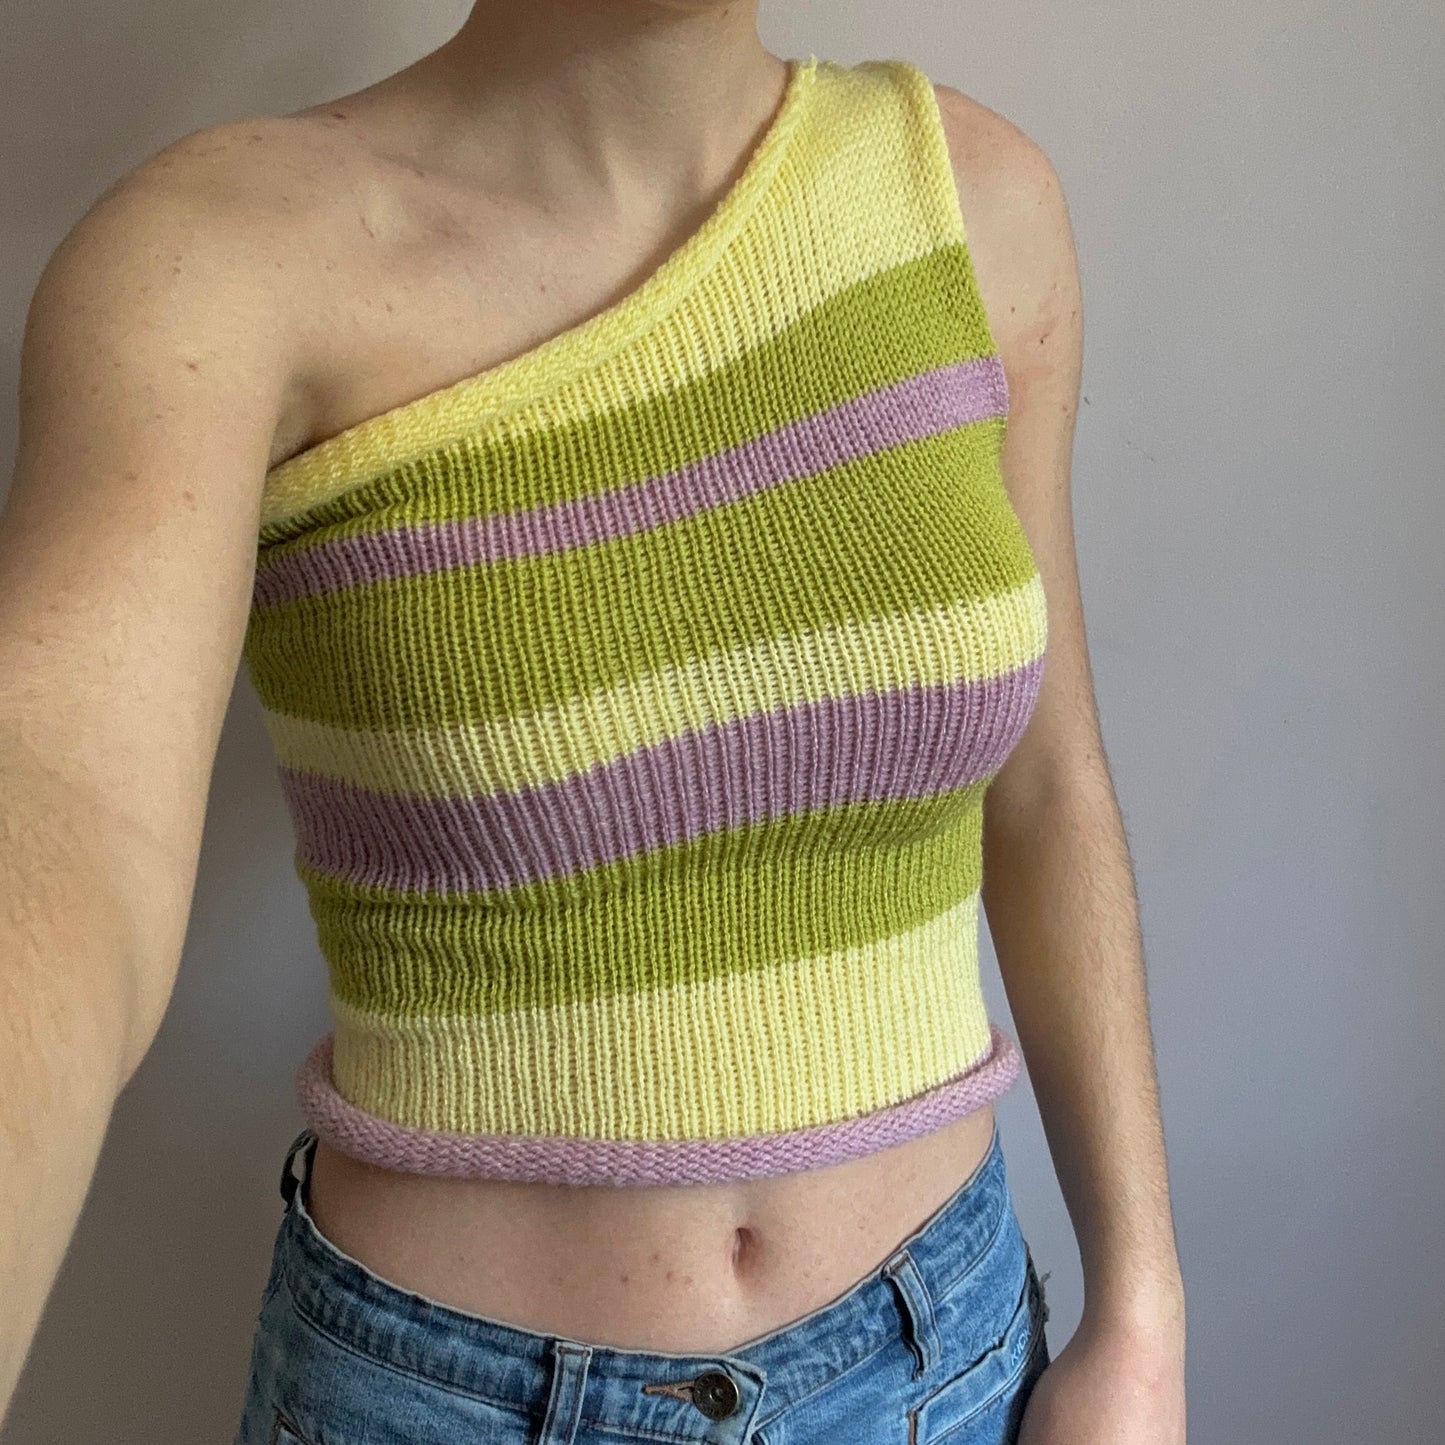 Handmade knitted uneven striped one shoulder asymmetrical top in dusky pink, pastel yellow and green